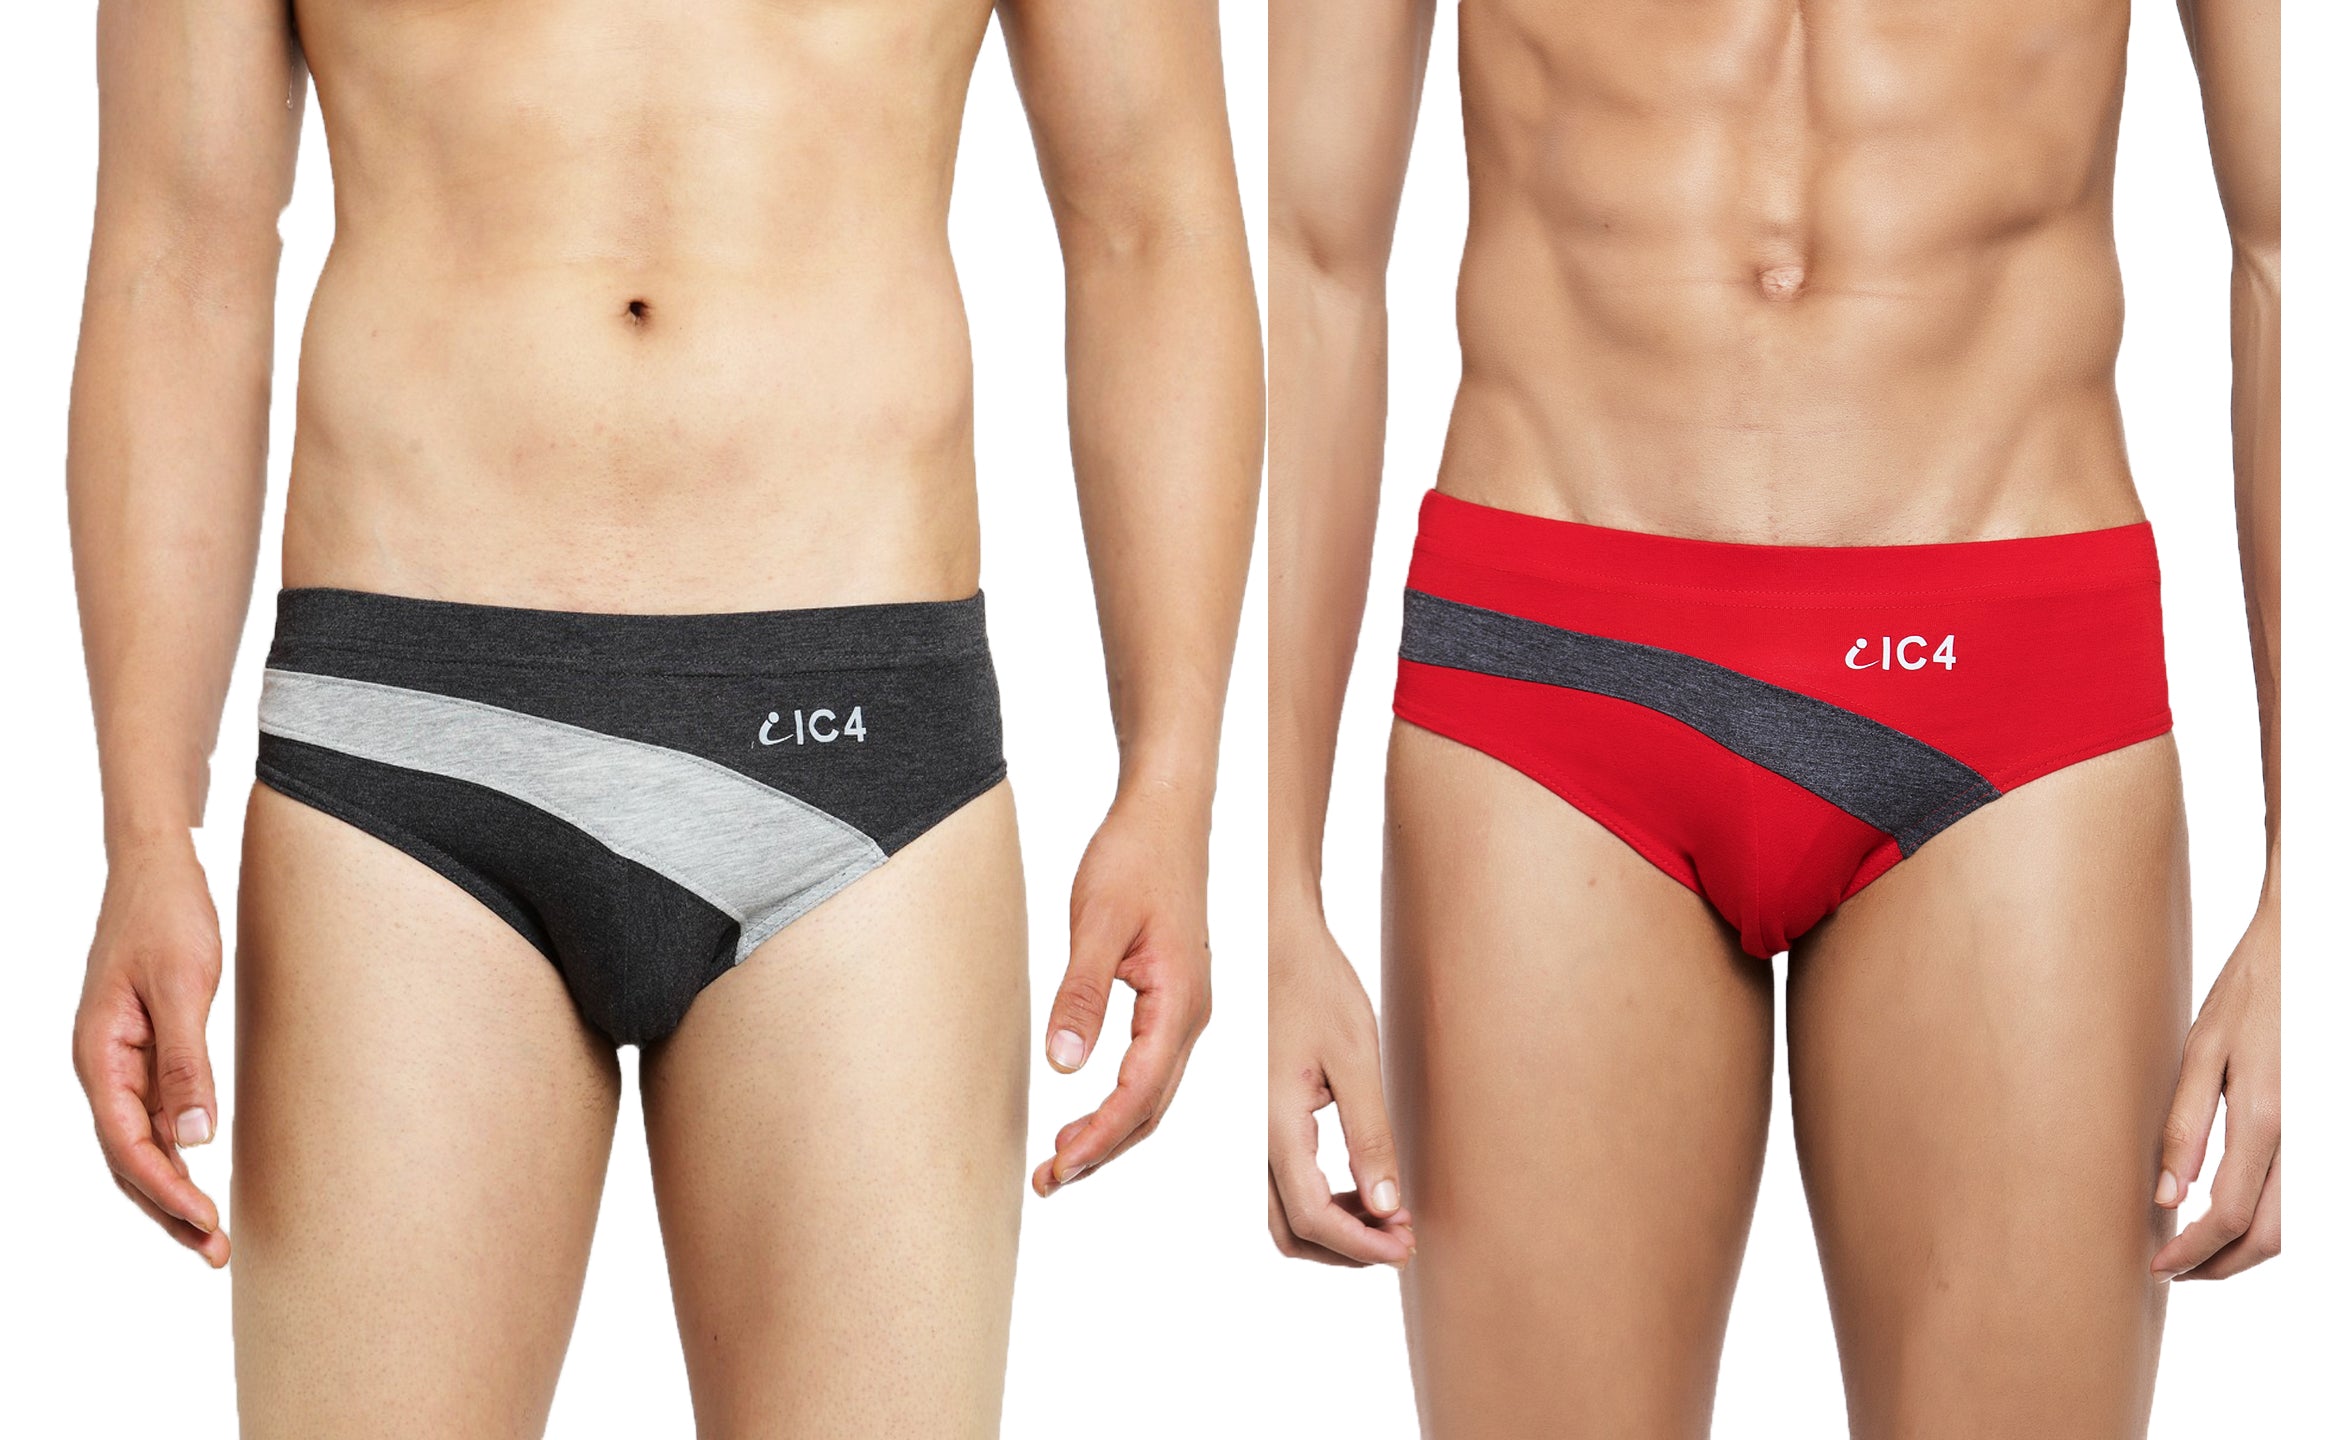 IC4 Men's Vogue Brief Combo Pack of 2